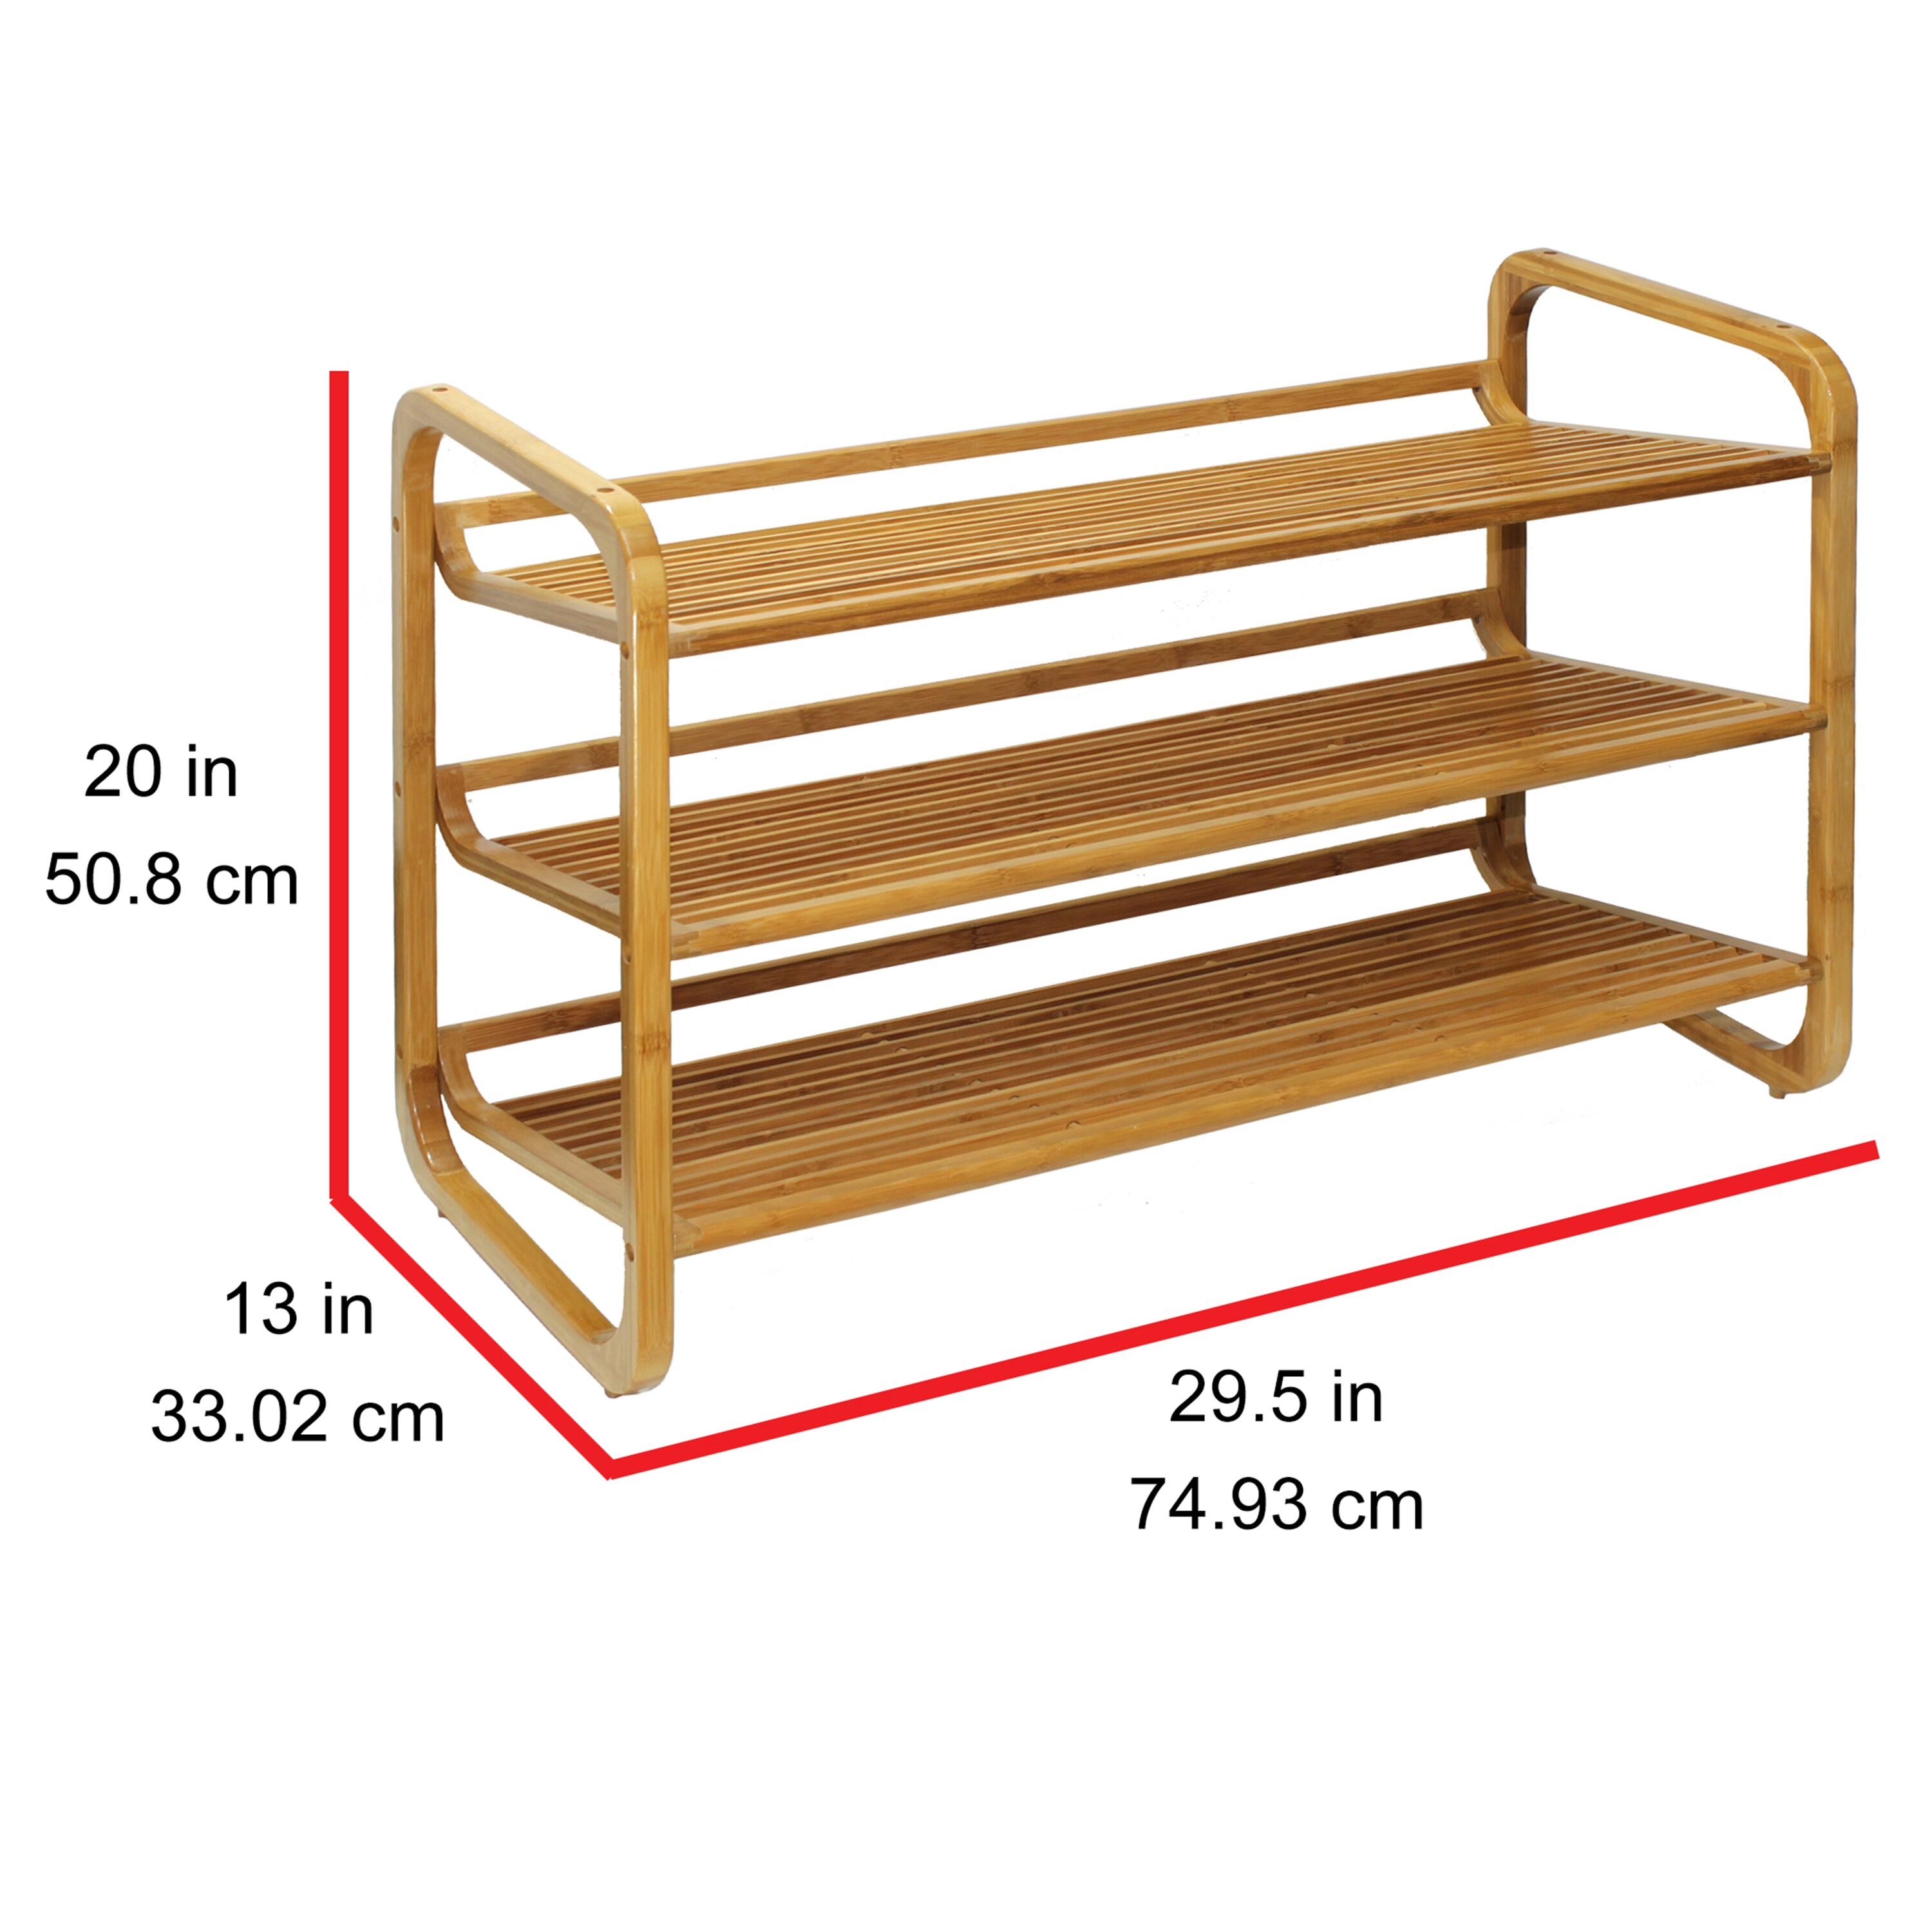 Home Expressions 3-Shelf Bamboo Shoe Rack, Color: Cream - JCPenney